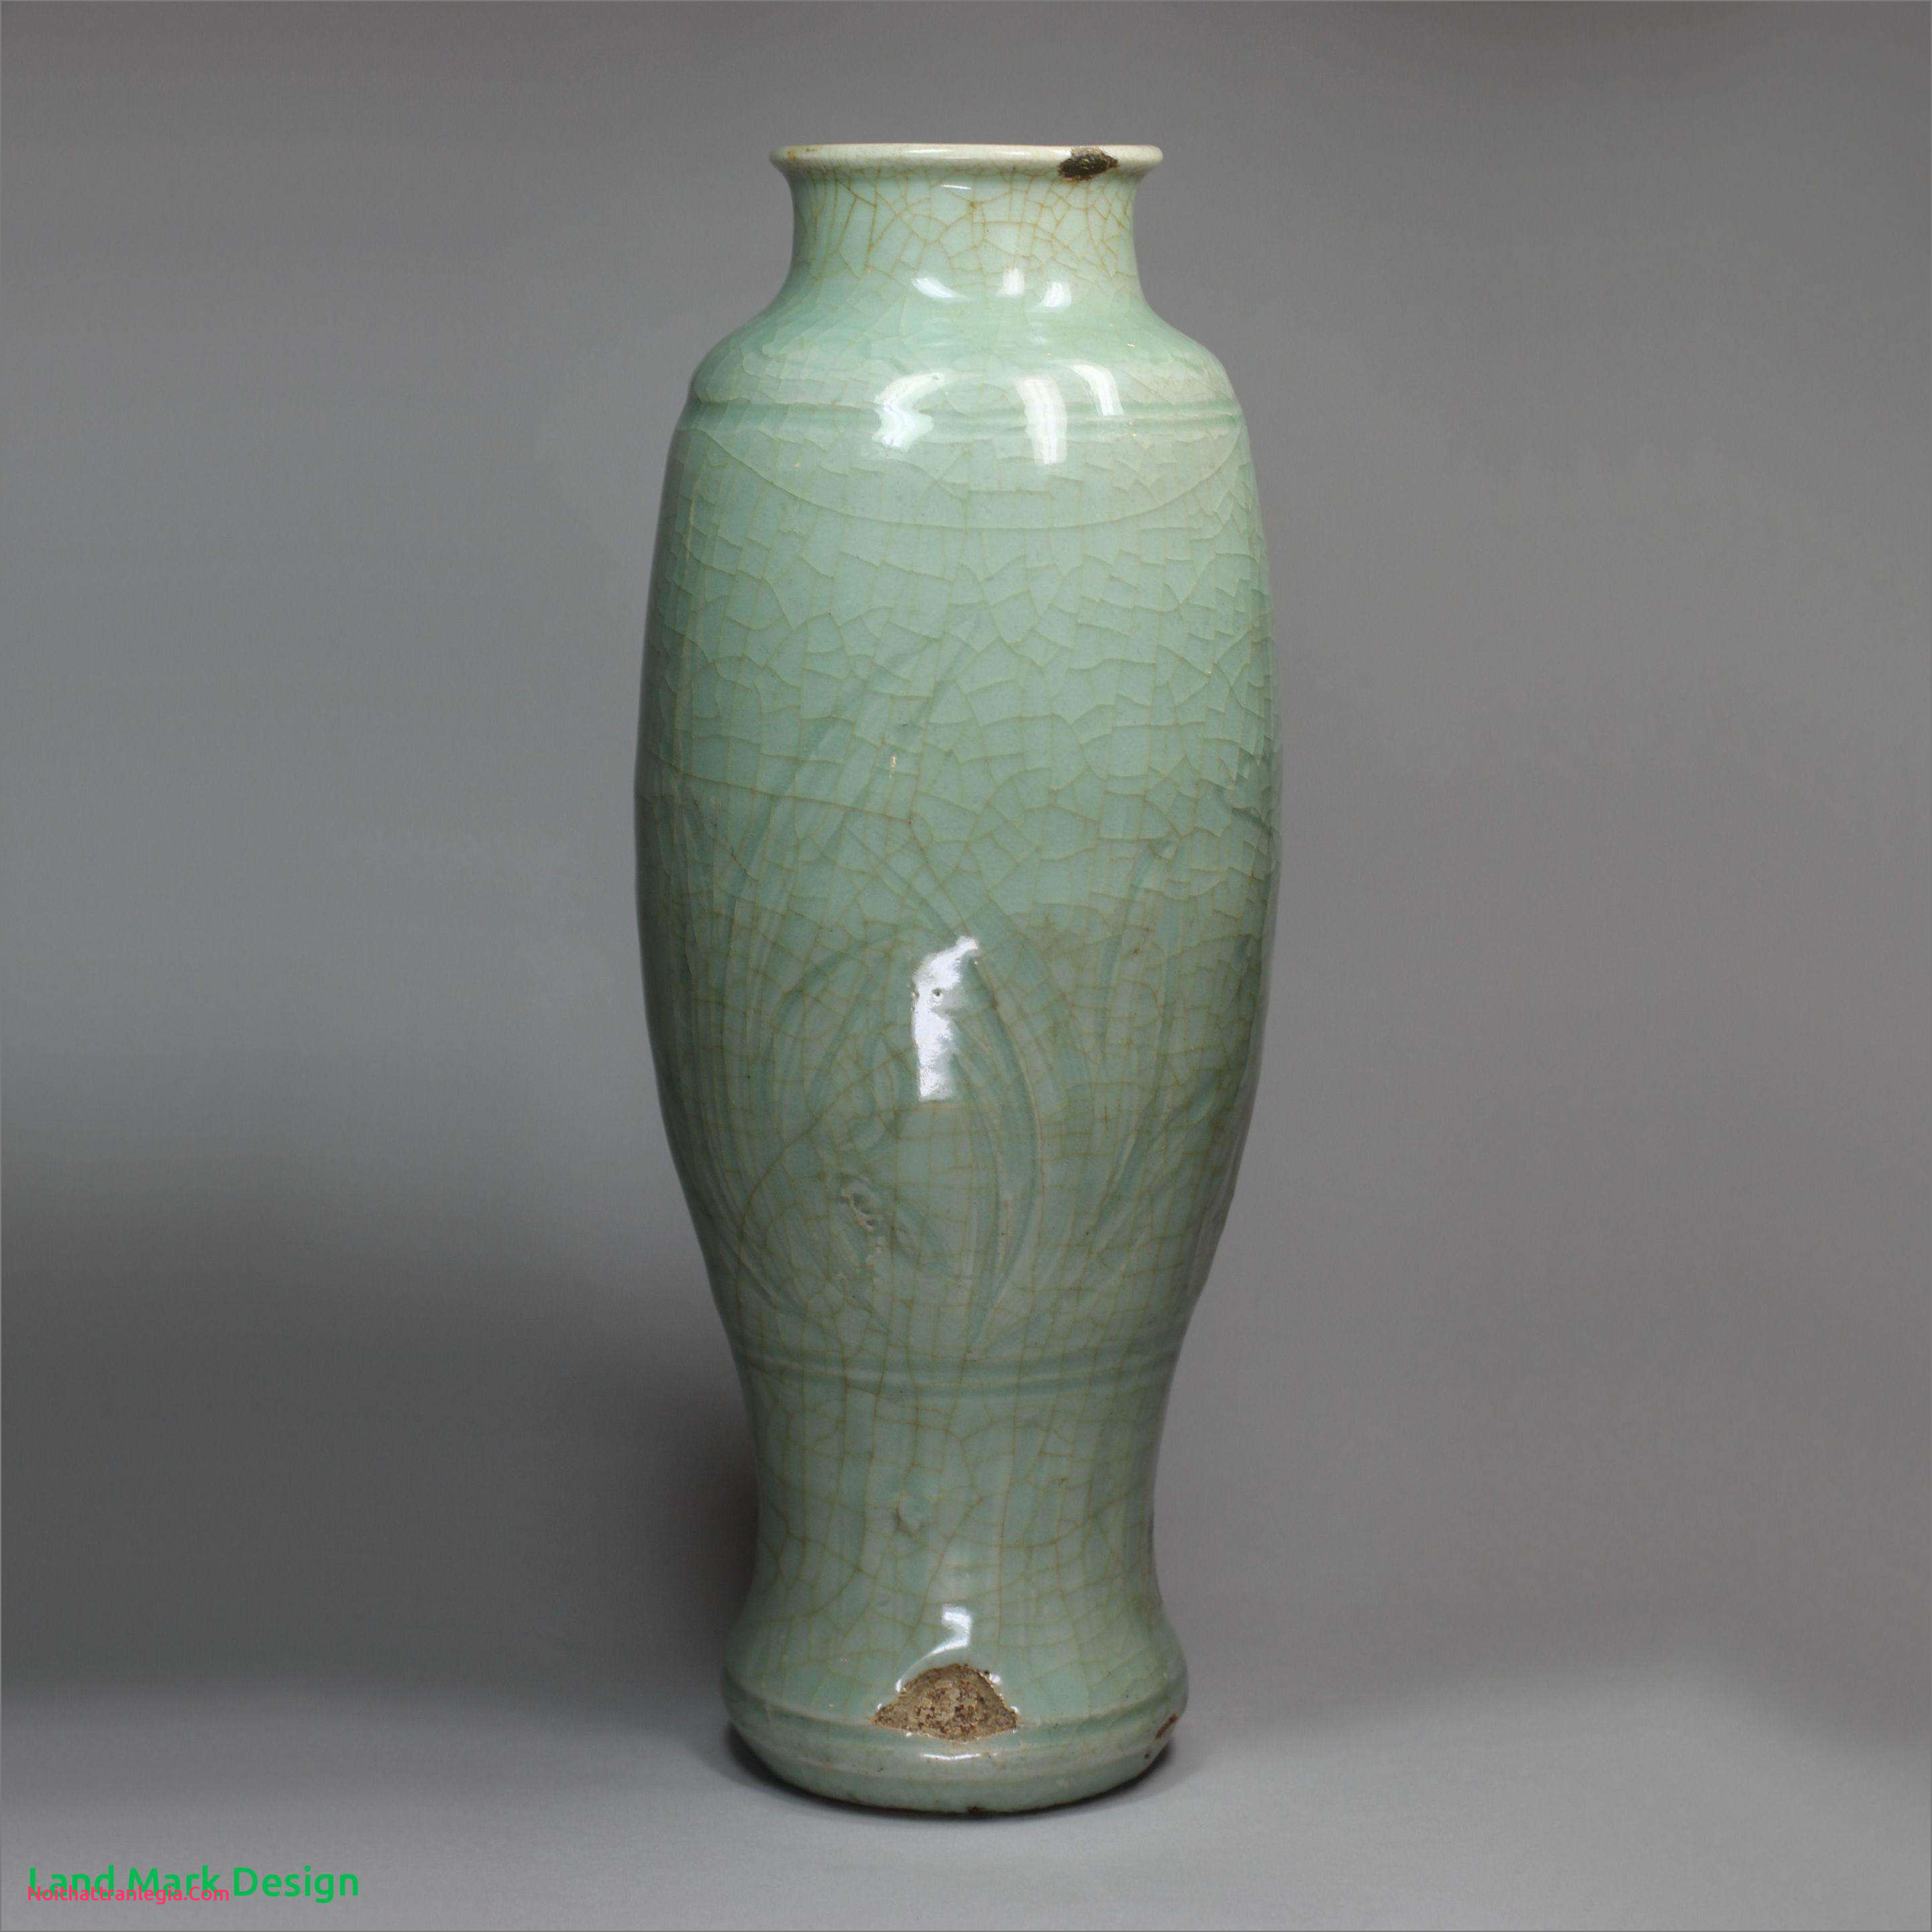 24 attractive Navajo Pottery Vases 2024 free download navajo pottery vases of 20 large floor vase nz noithattranlegia vases design in full size of living room green ceramic vase new xxy663h vases chinese celadon vase here large